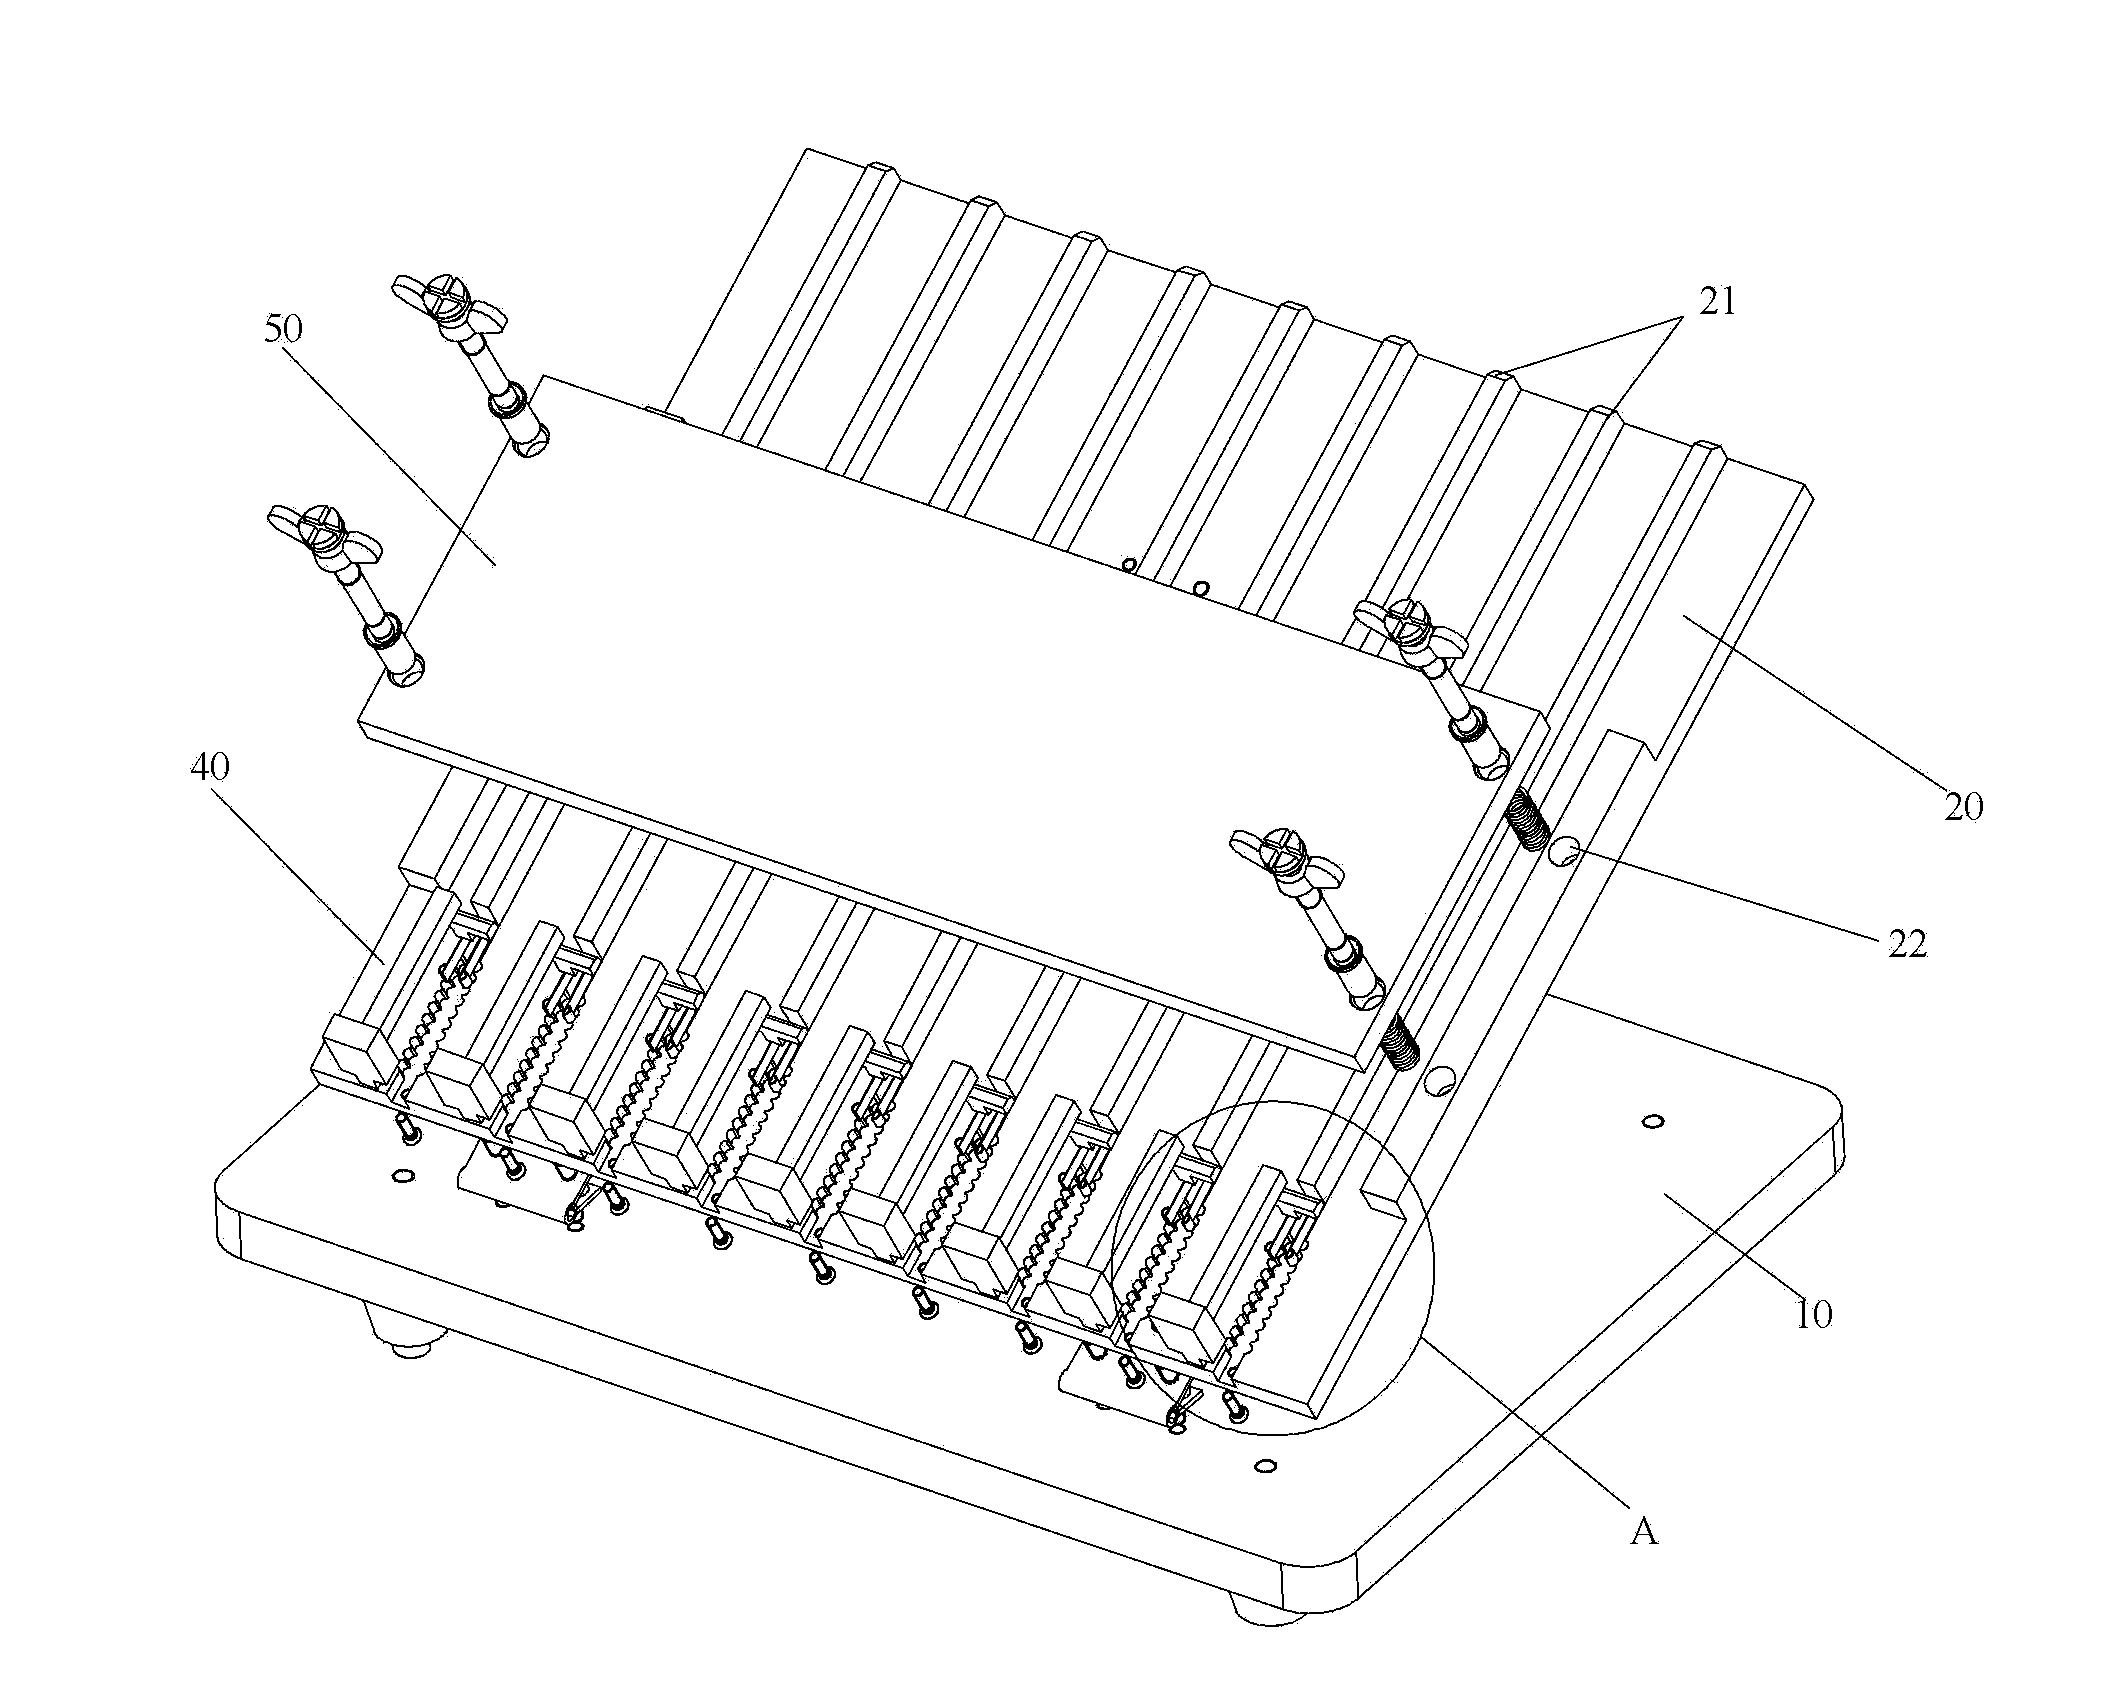 Automatic discharging device